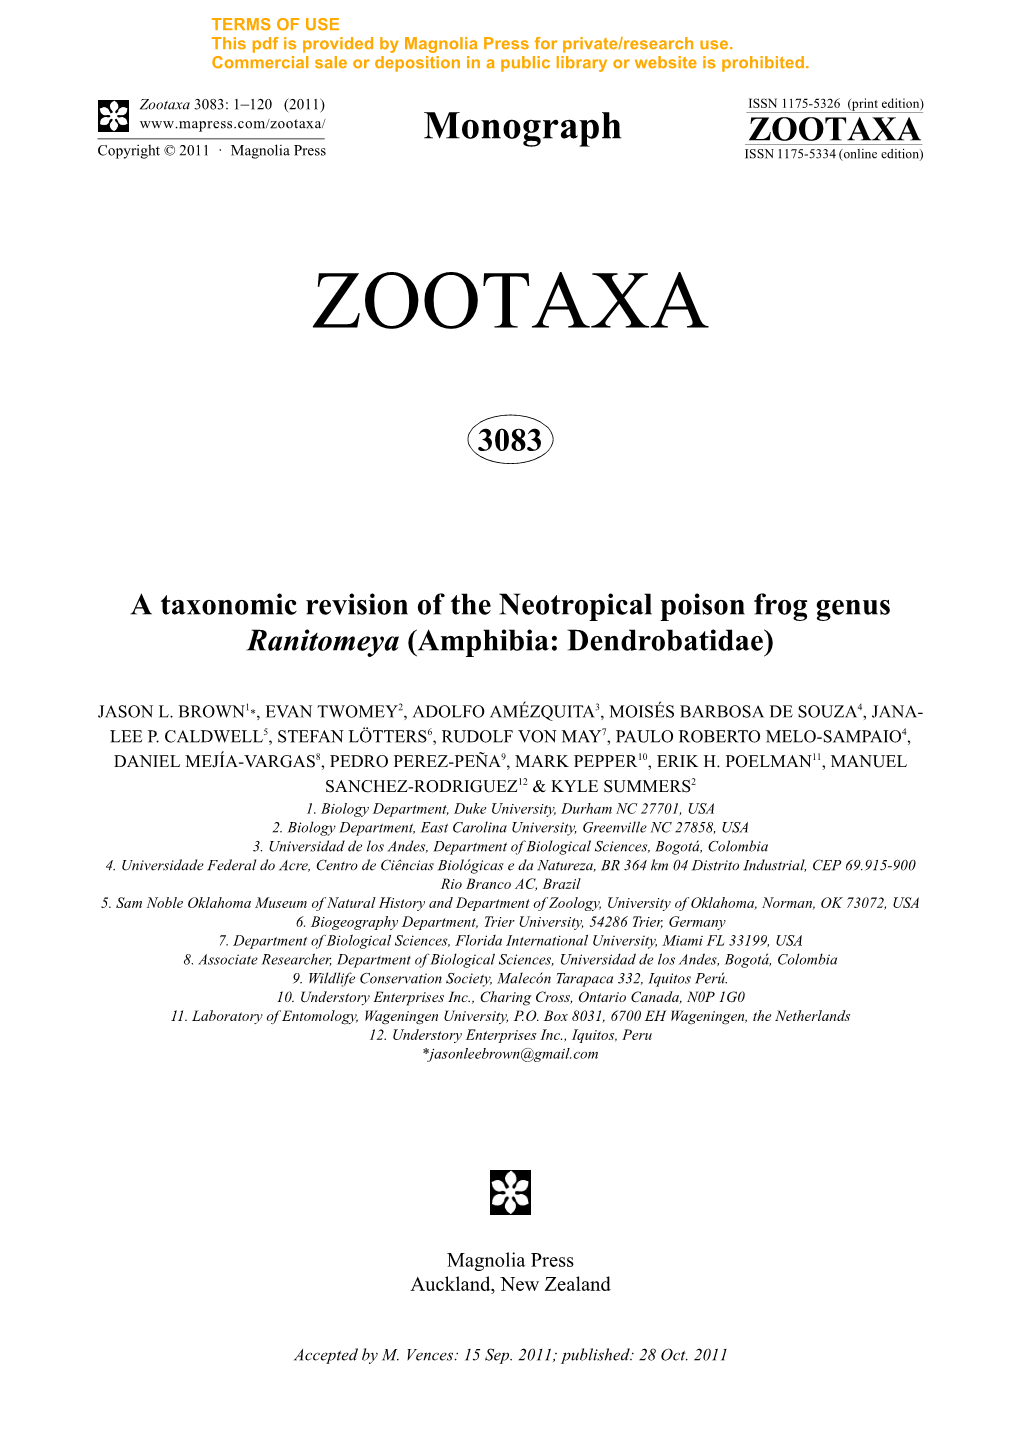 A Taxonomic Revision of the Neotropical Poison Frog Genus Ranitomeya (Amphibia: Dendrobatidae)